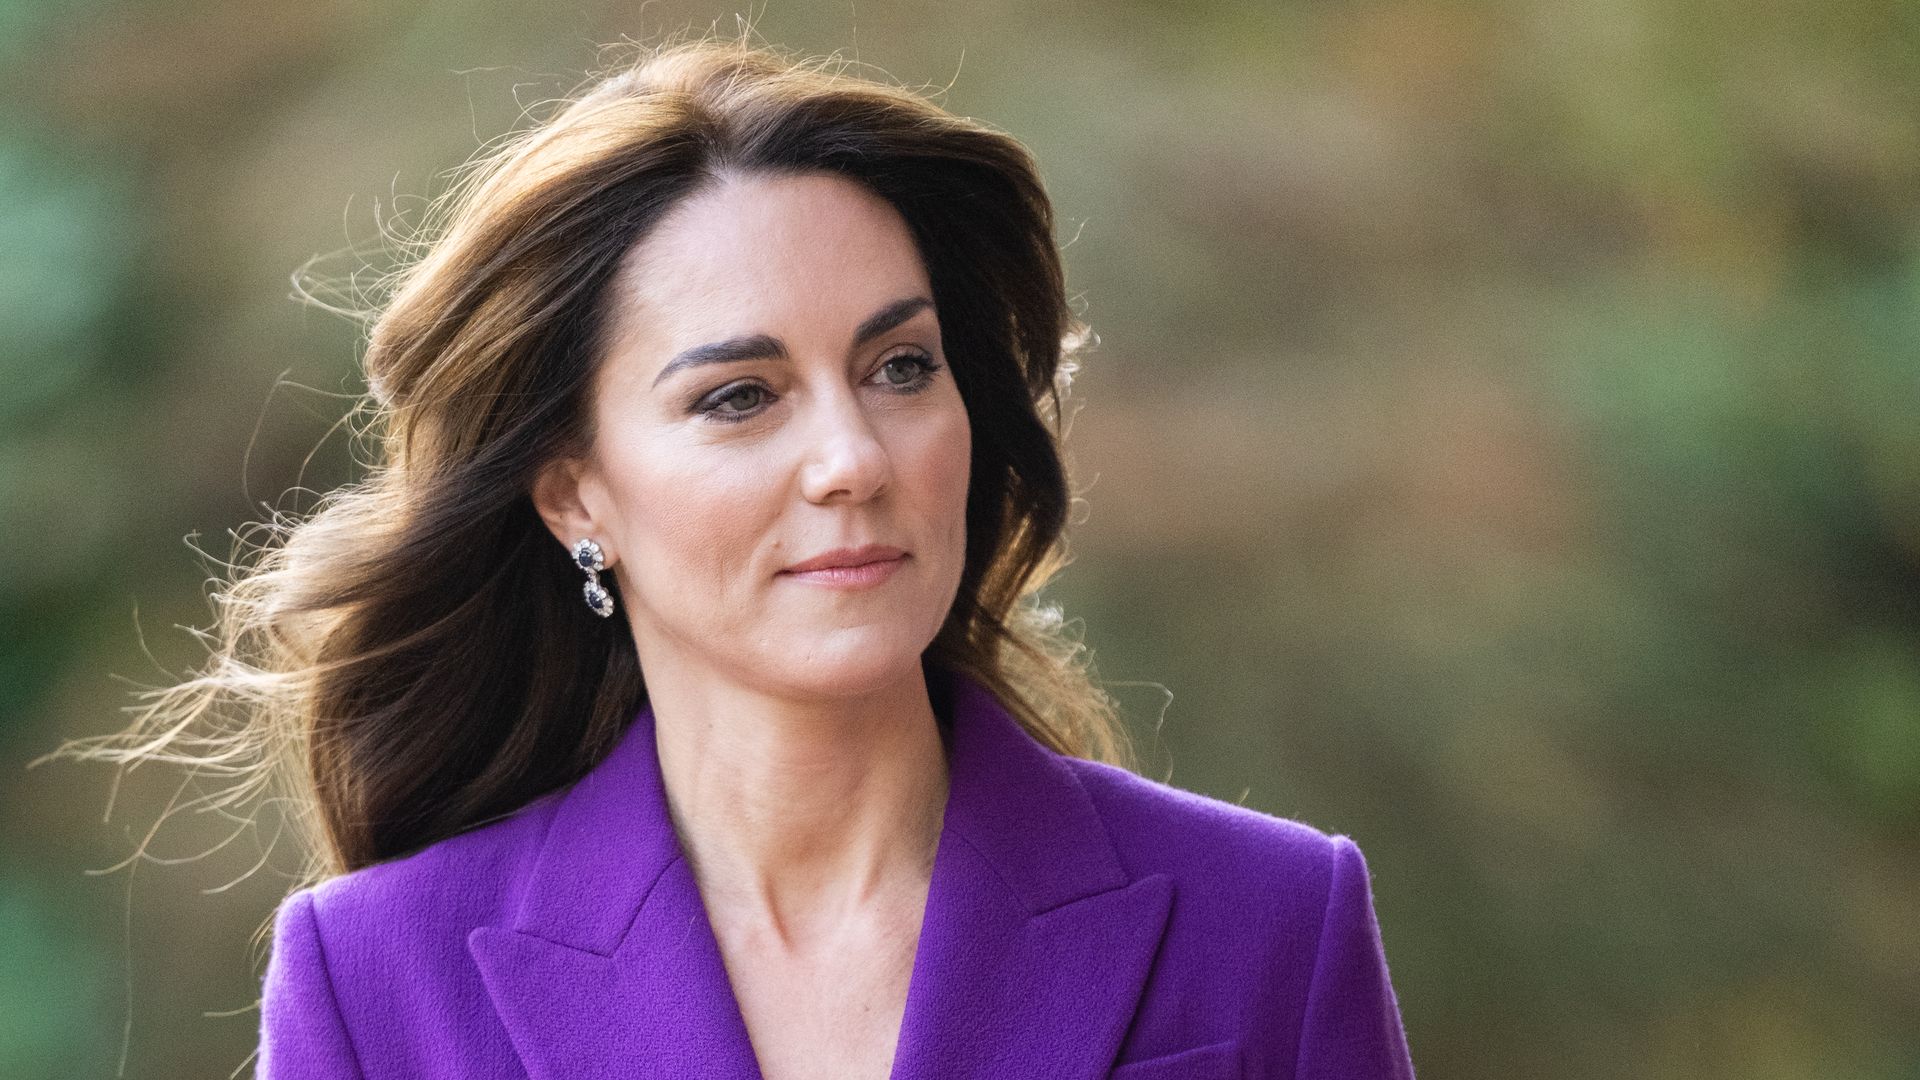 Kate Middleton says shes in "early stages" of cancer treatment